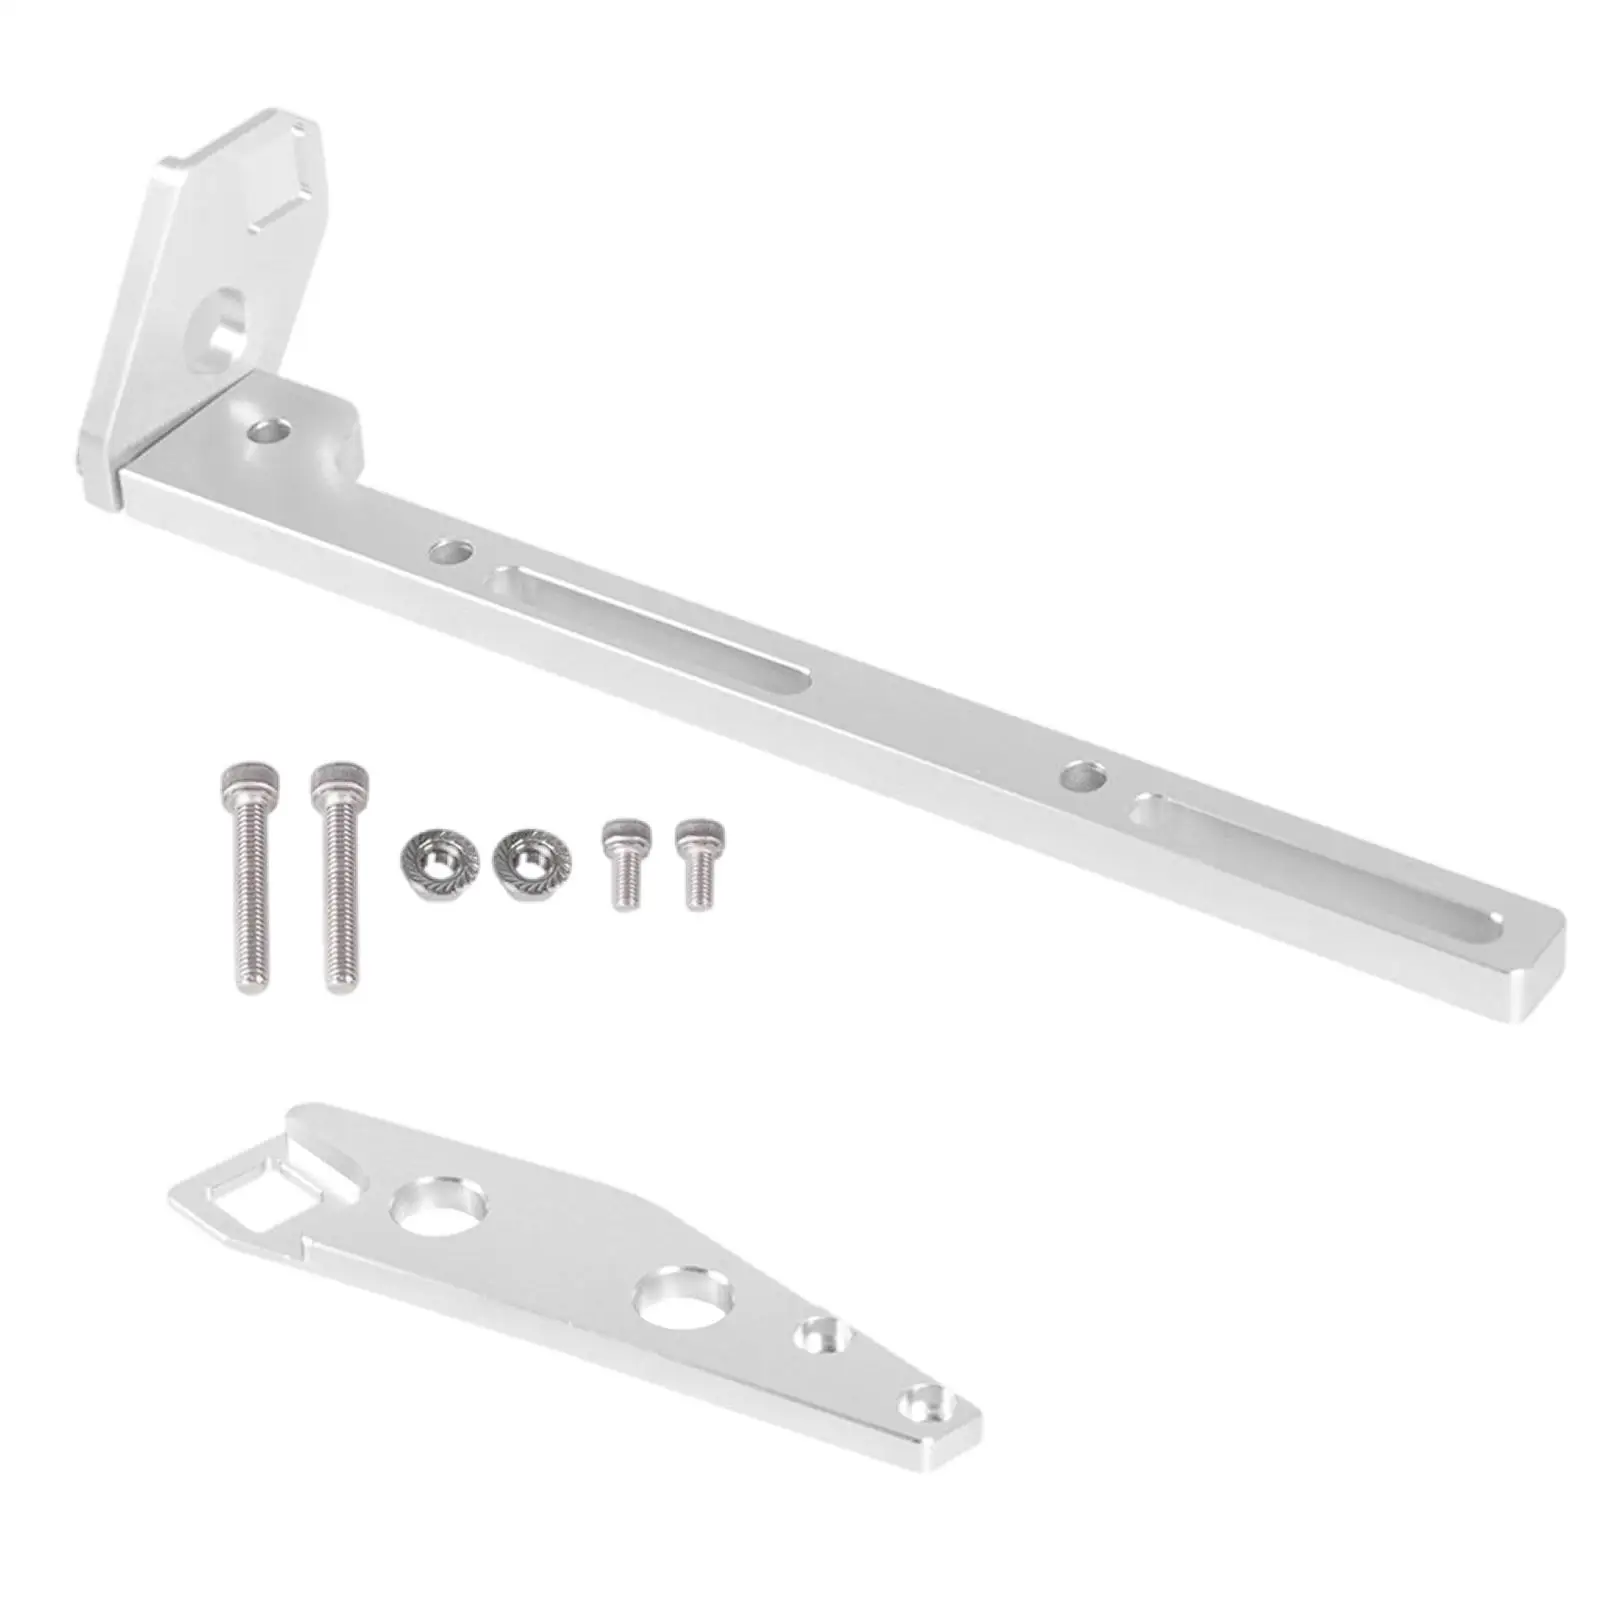 Throttle Cable Bracket Aluminum Alloy Silver Adjustable Universal 102mm Fit for 870017 870016 832142 820031